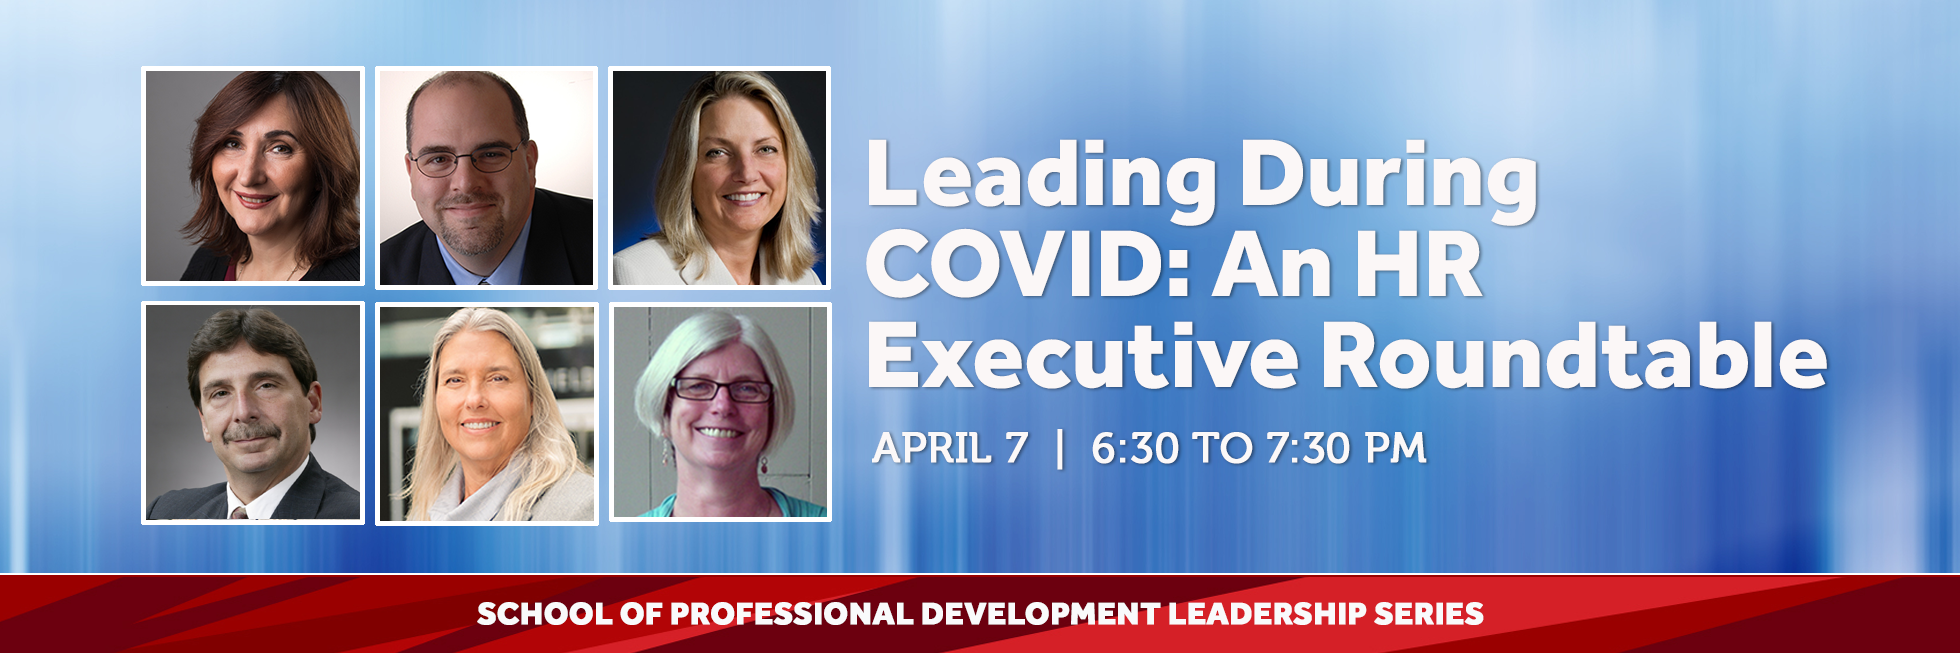 Leading During Covid: An HR Executive Roundtable, April 4 at 6:30 pm, Pictures of smiling HR execs